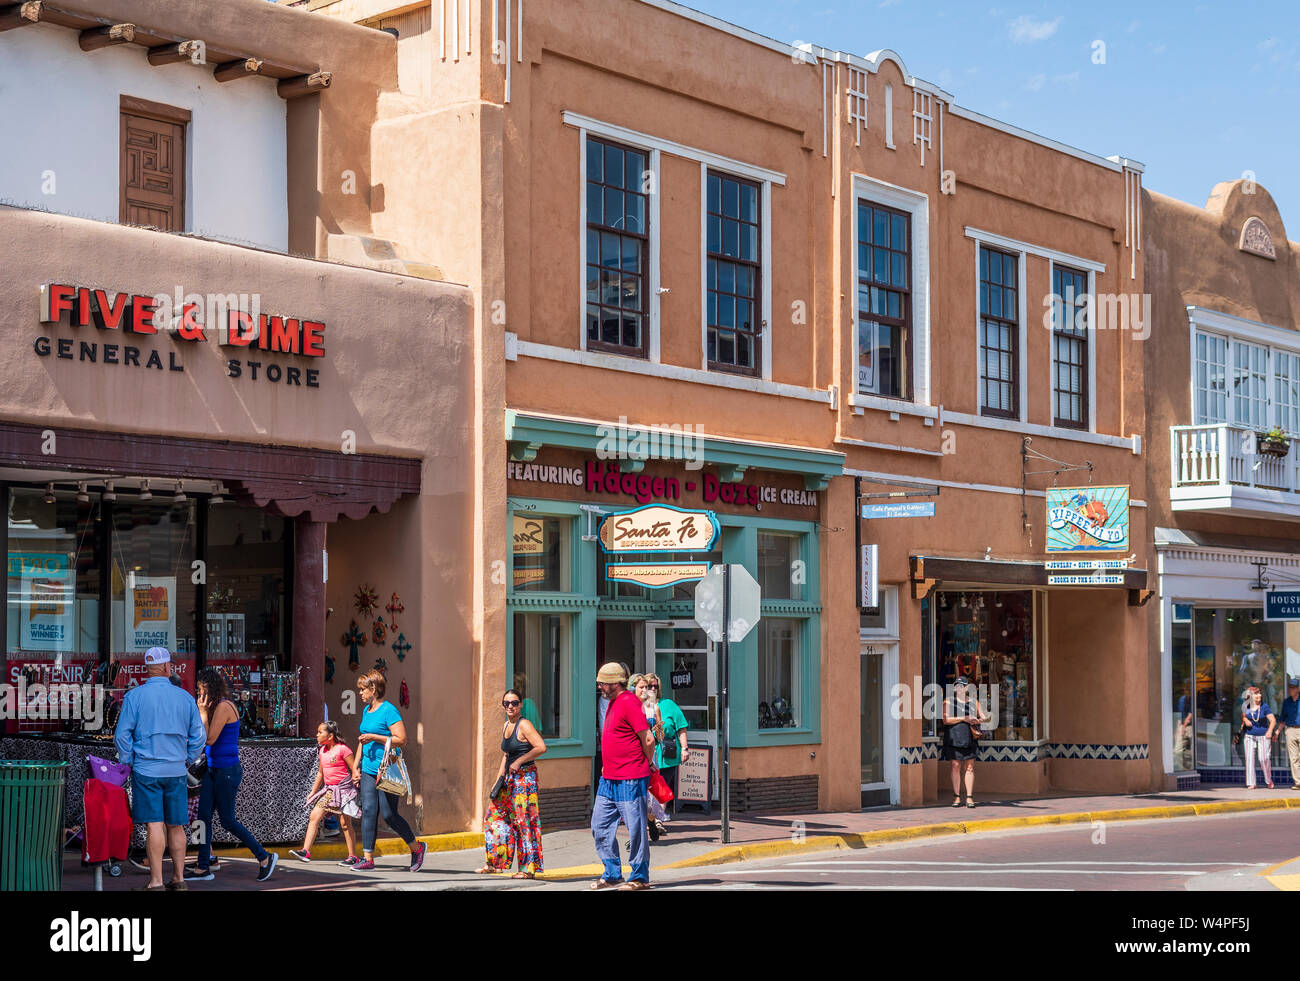 Santa Fe shops near the Plaza, Five and Dime General Store famous for their Frito Pie on San Francisco Street, Santa Fe, New Mexico, USA. Stock Photo